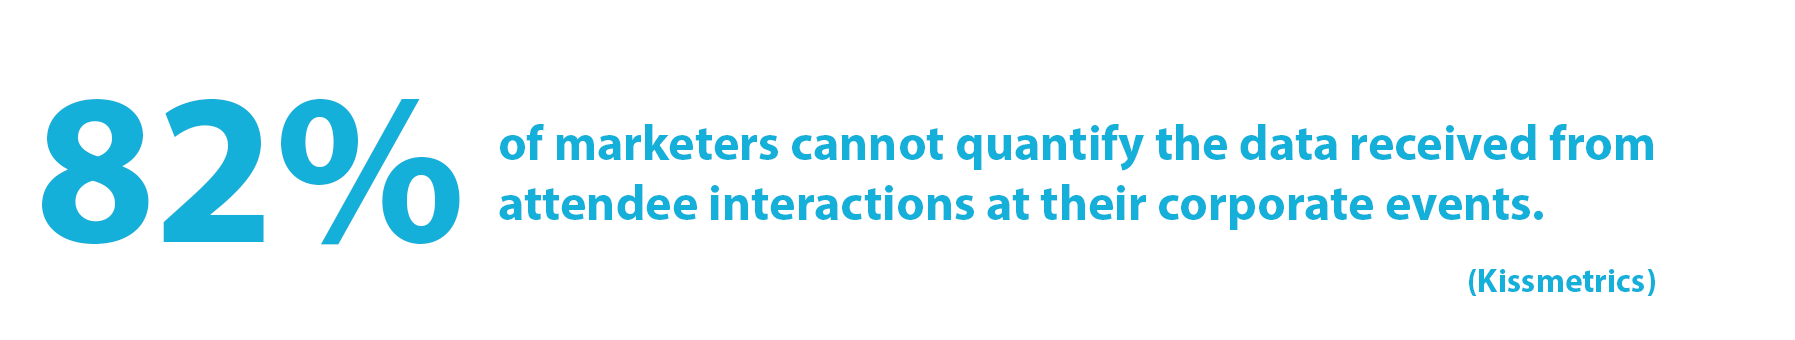 Statistic: 82% of marketers cannot quantify the data received from attendee interactions at their corporate events. (Kissmetrics)